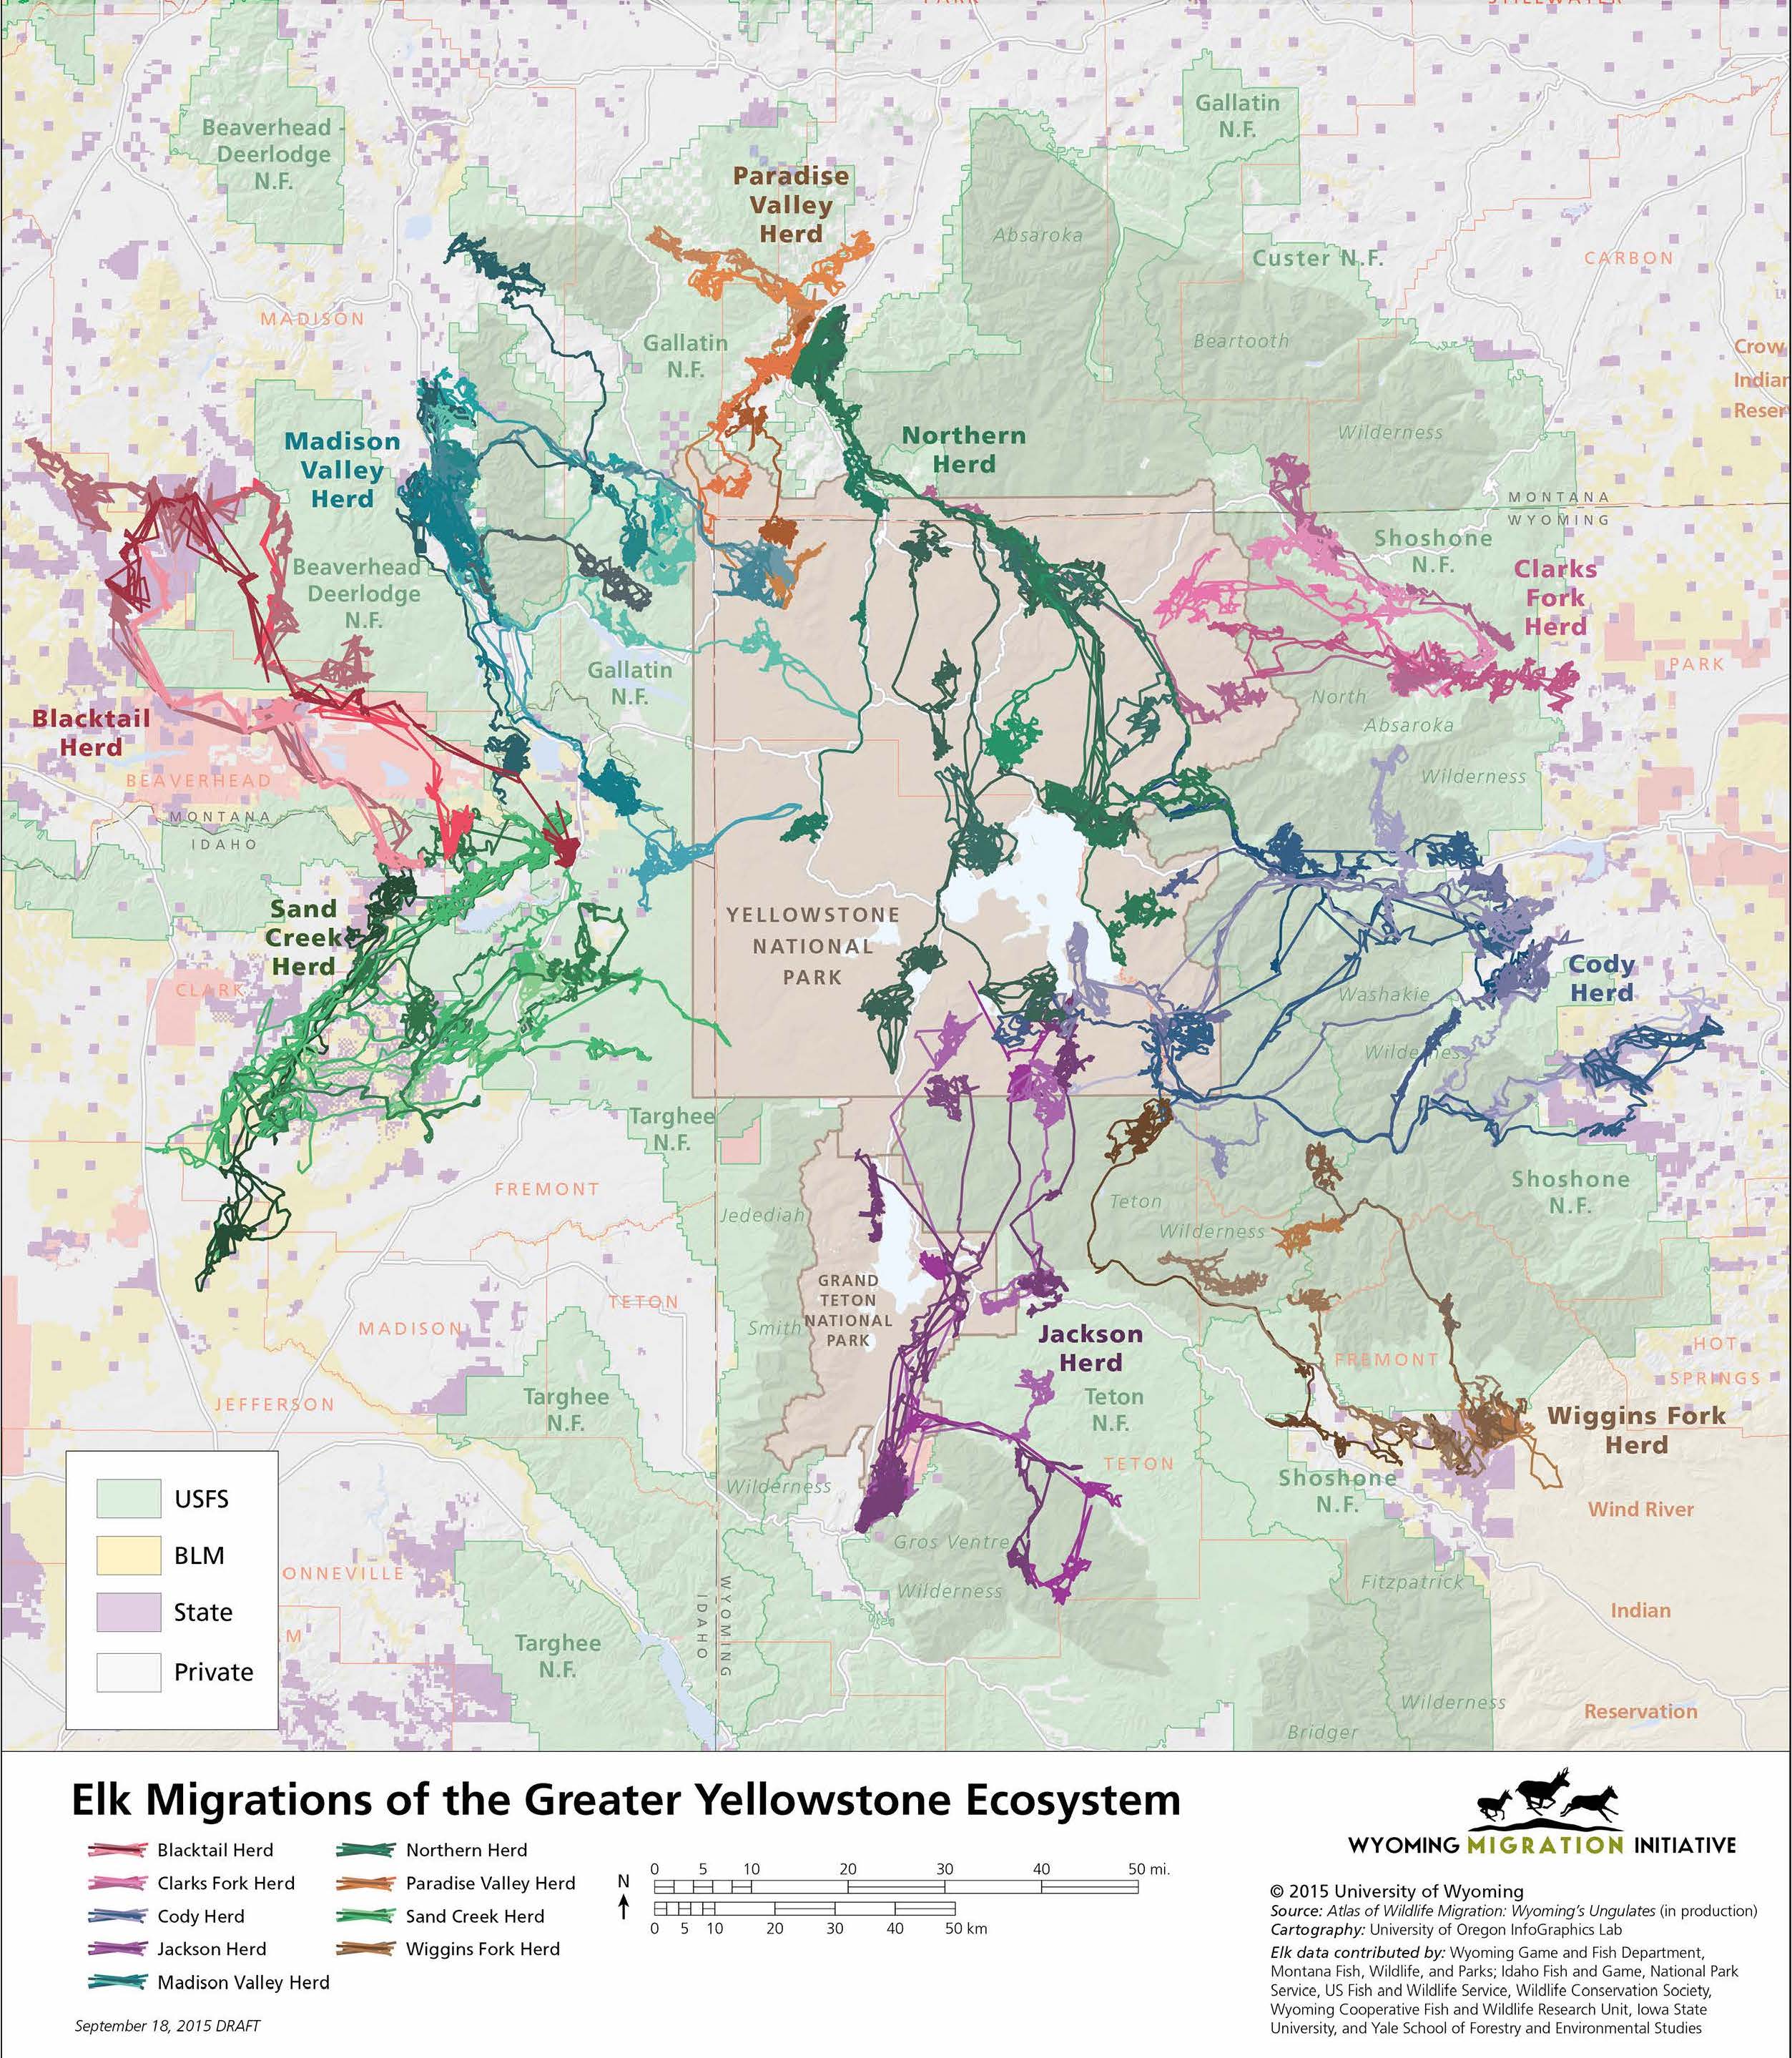 Protecting Elk Migration in the Greater Yellowstone Ecosystem